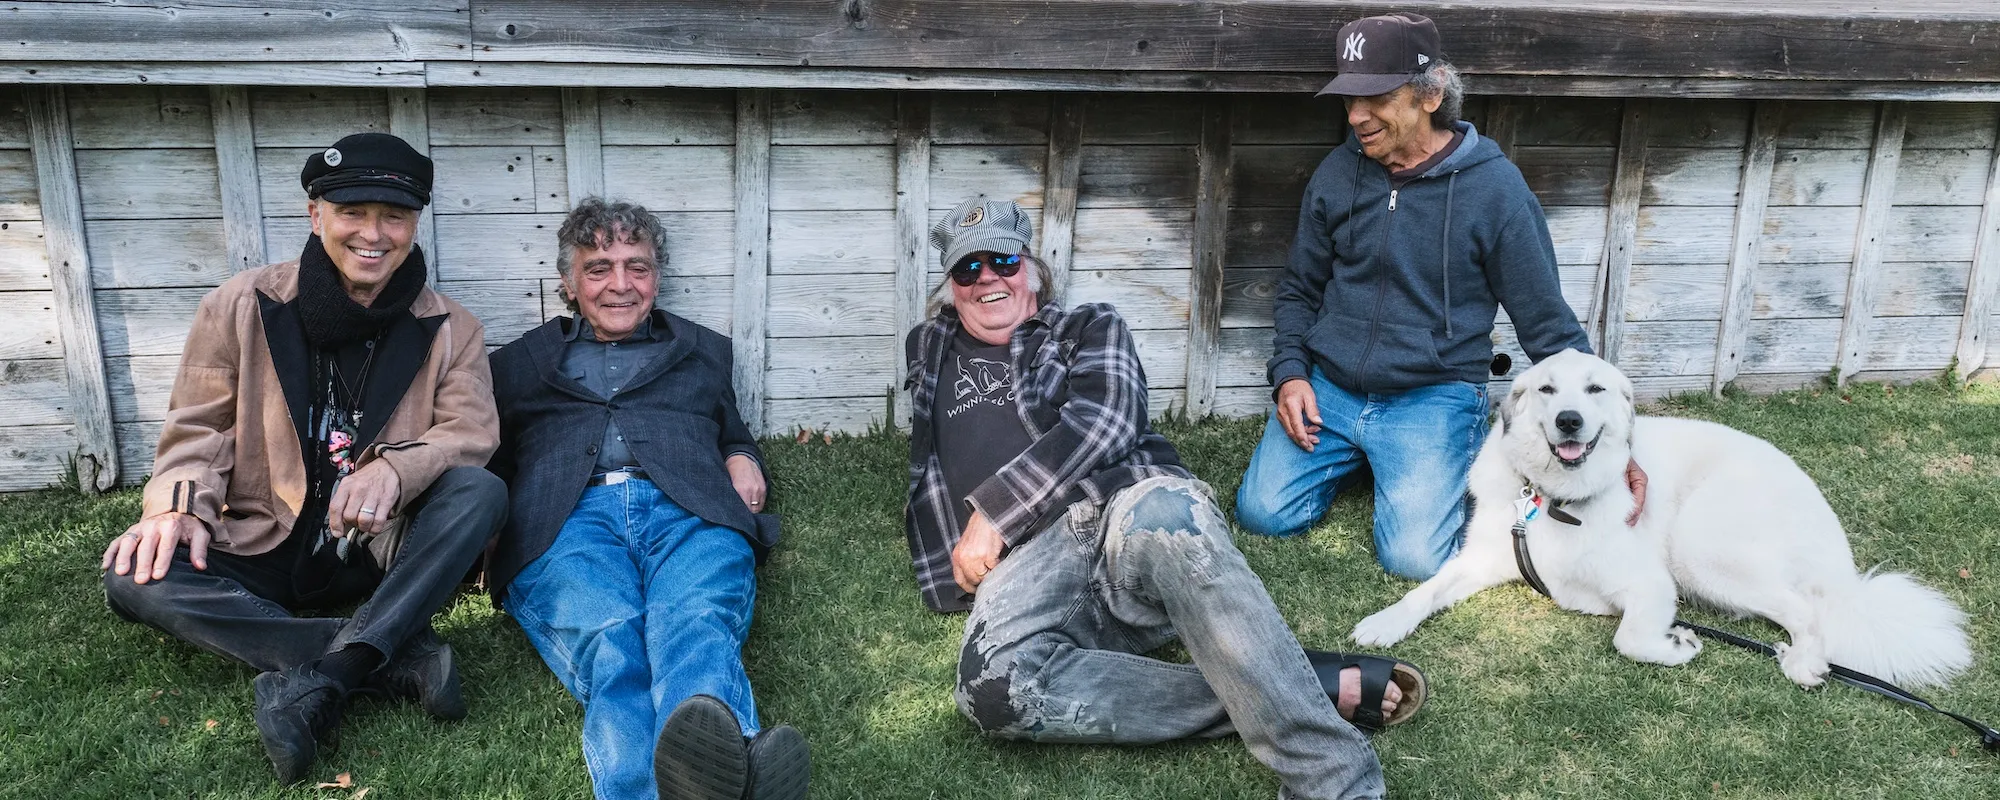 Exclusive: Neil Young & Crazy Horse Bassist Billy Talbot Says Band’s New Live Album “Rock[s] from the Beginning to the End”